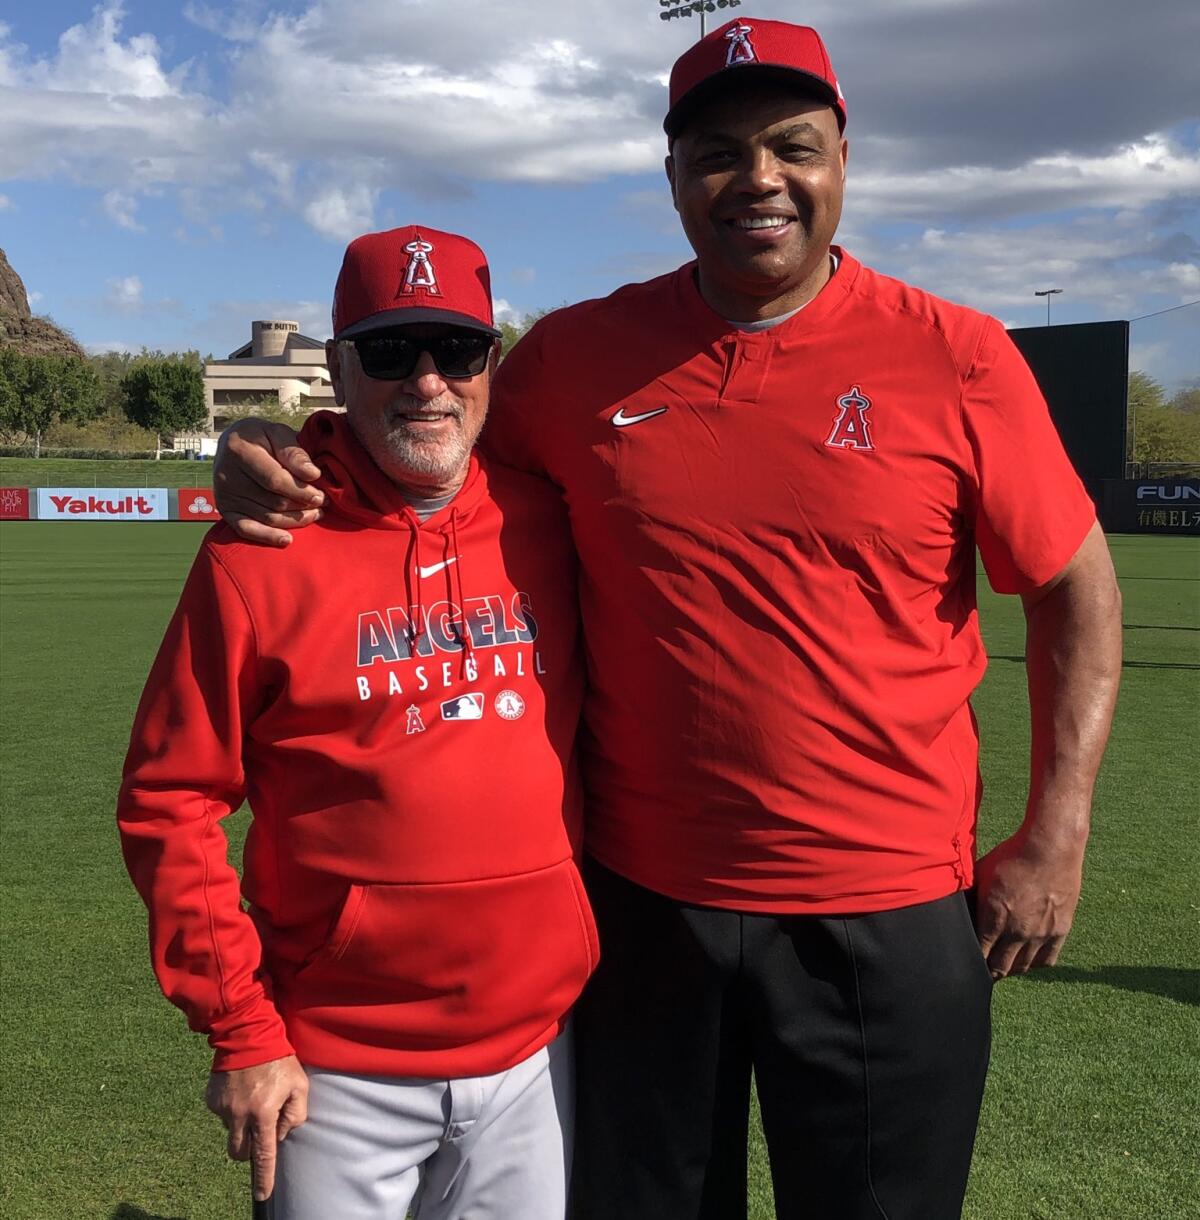 NBA legend Charles Barkley, right, poses for a photo with Angels manager Joe Maddon during Angels training camp at Tempe Diablo Stadium in Tempe, Ariz., on March 2, 2020.